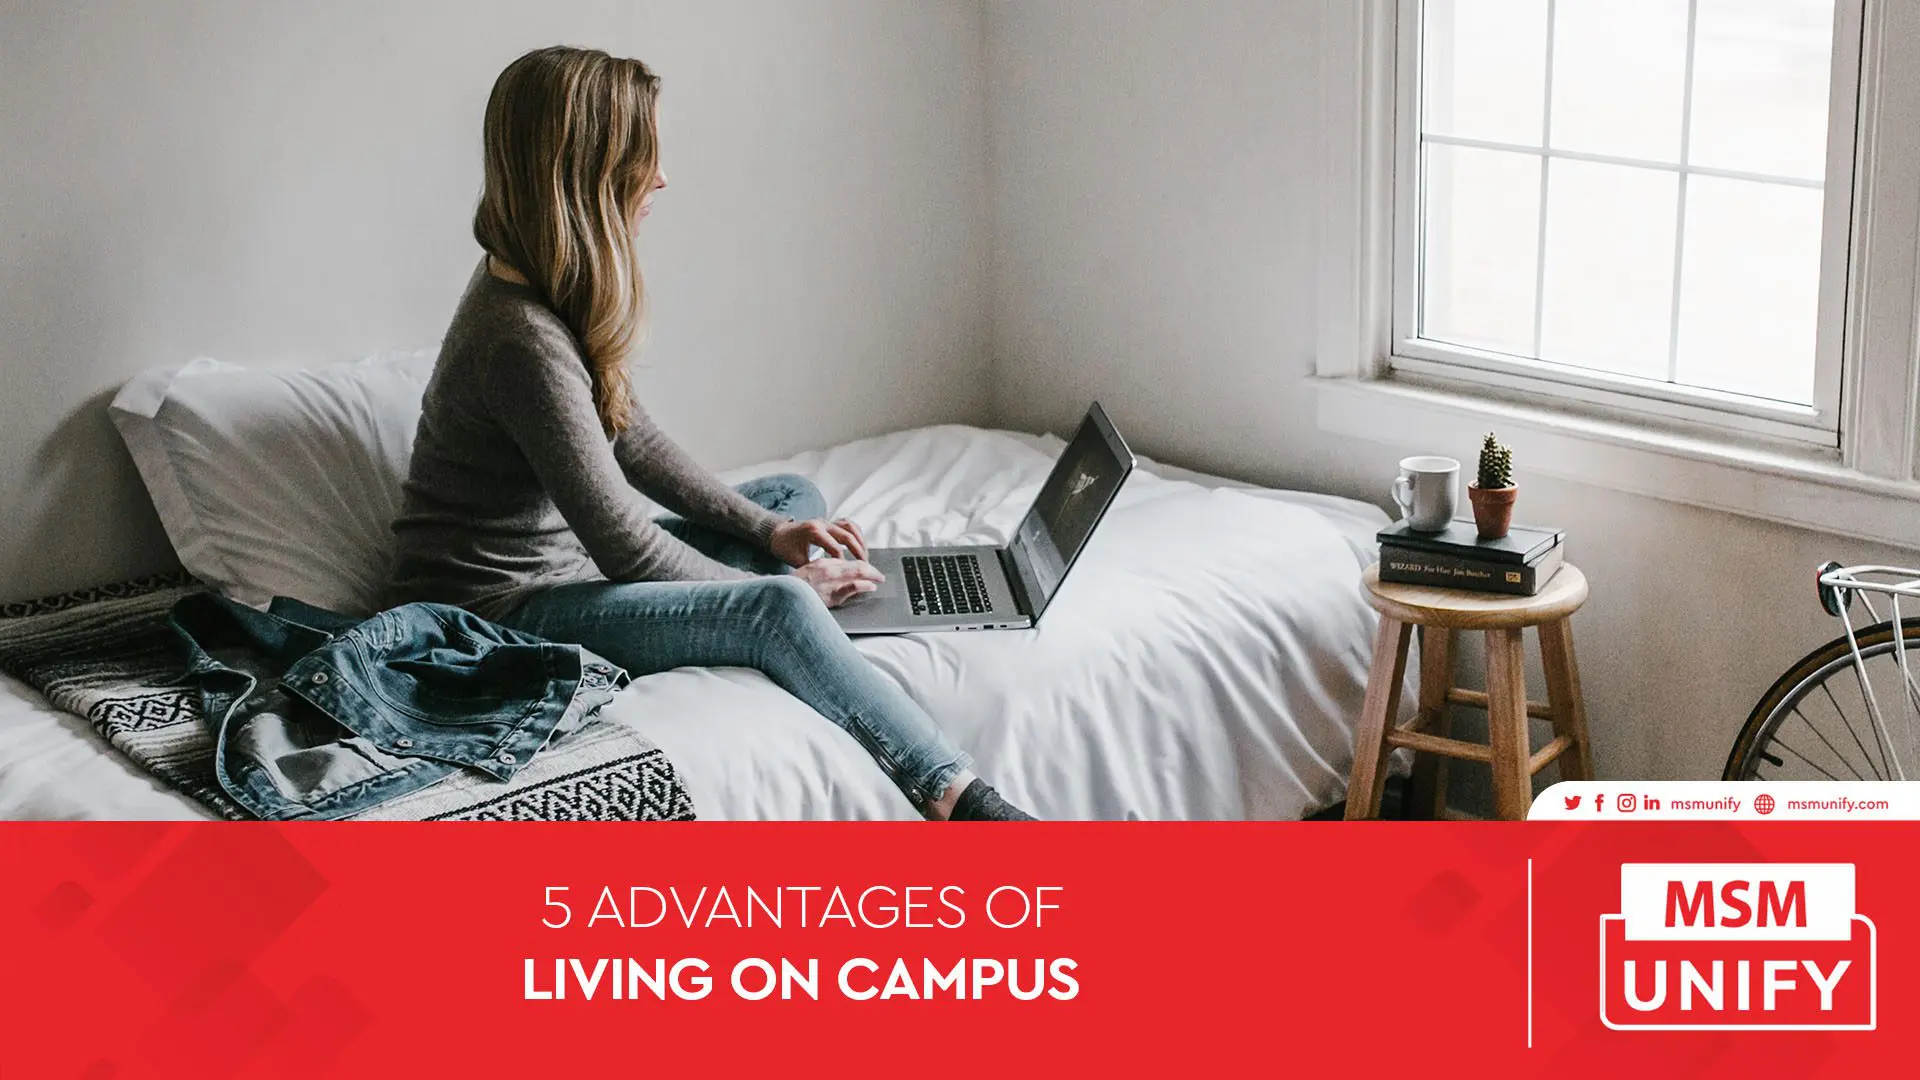 MSM Unify 5 Advantages of Living On Campus